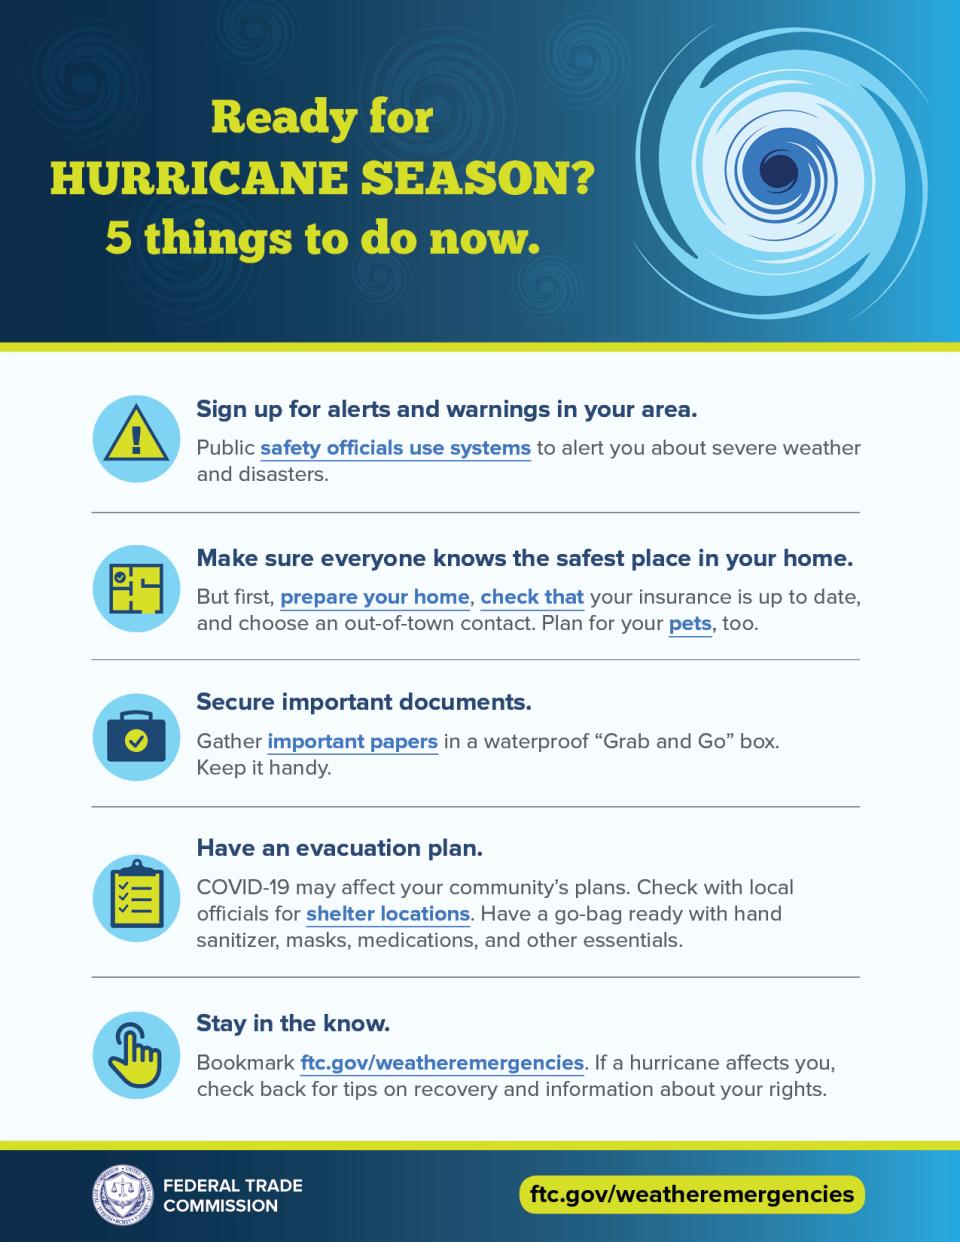 Are you ready to deal with weather emergencies and avoid scams?